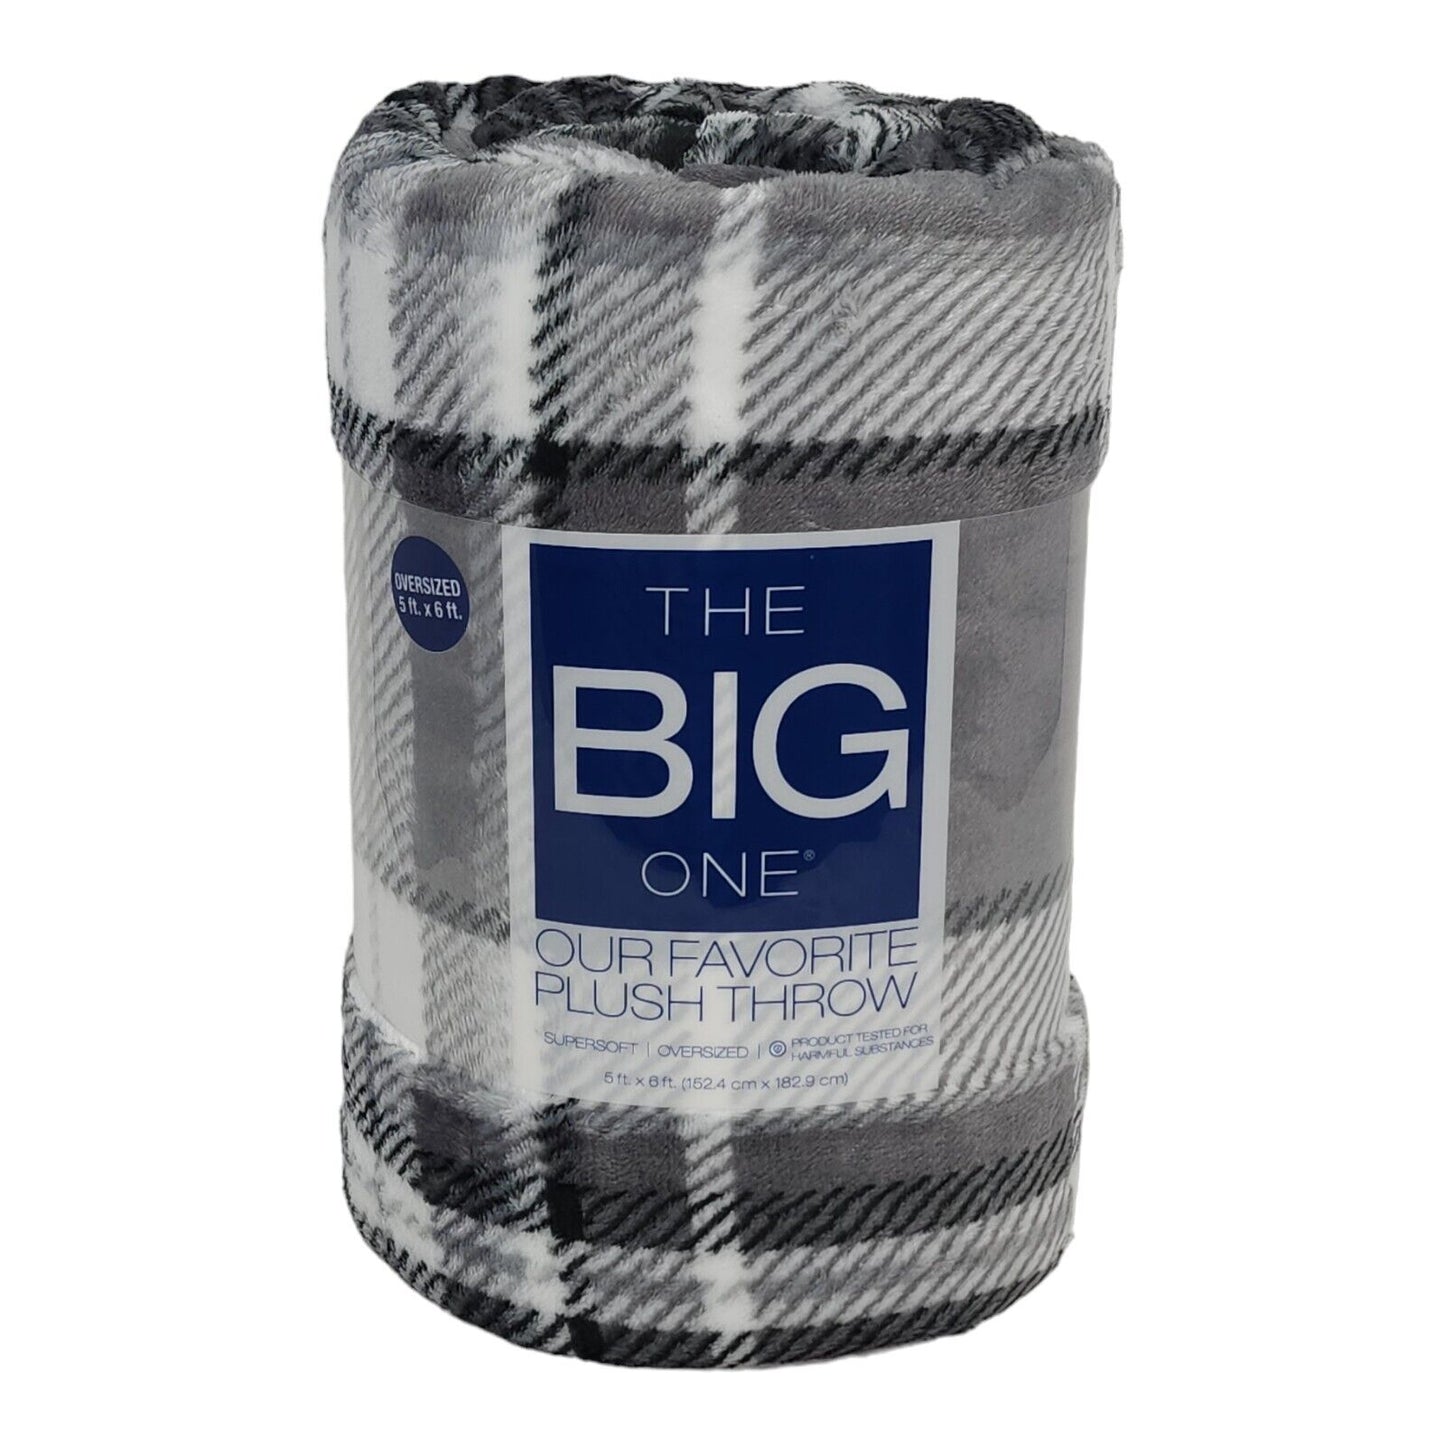 The Big One Throw Blanket Plush Super Soft Warm Cozy for Living Room 60 x 72 inches Oversized (Grey Plaid)